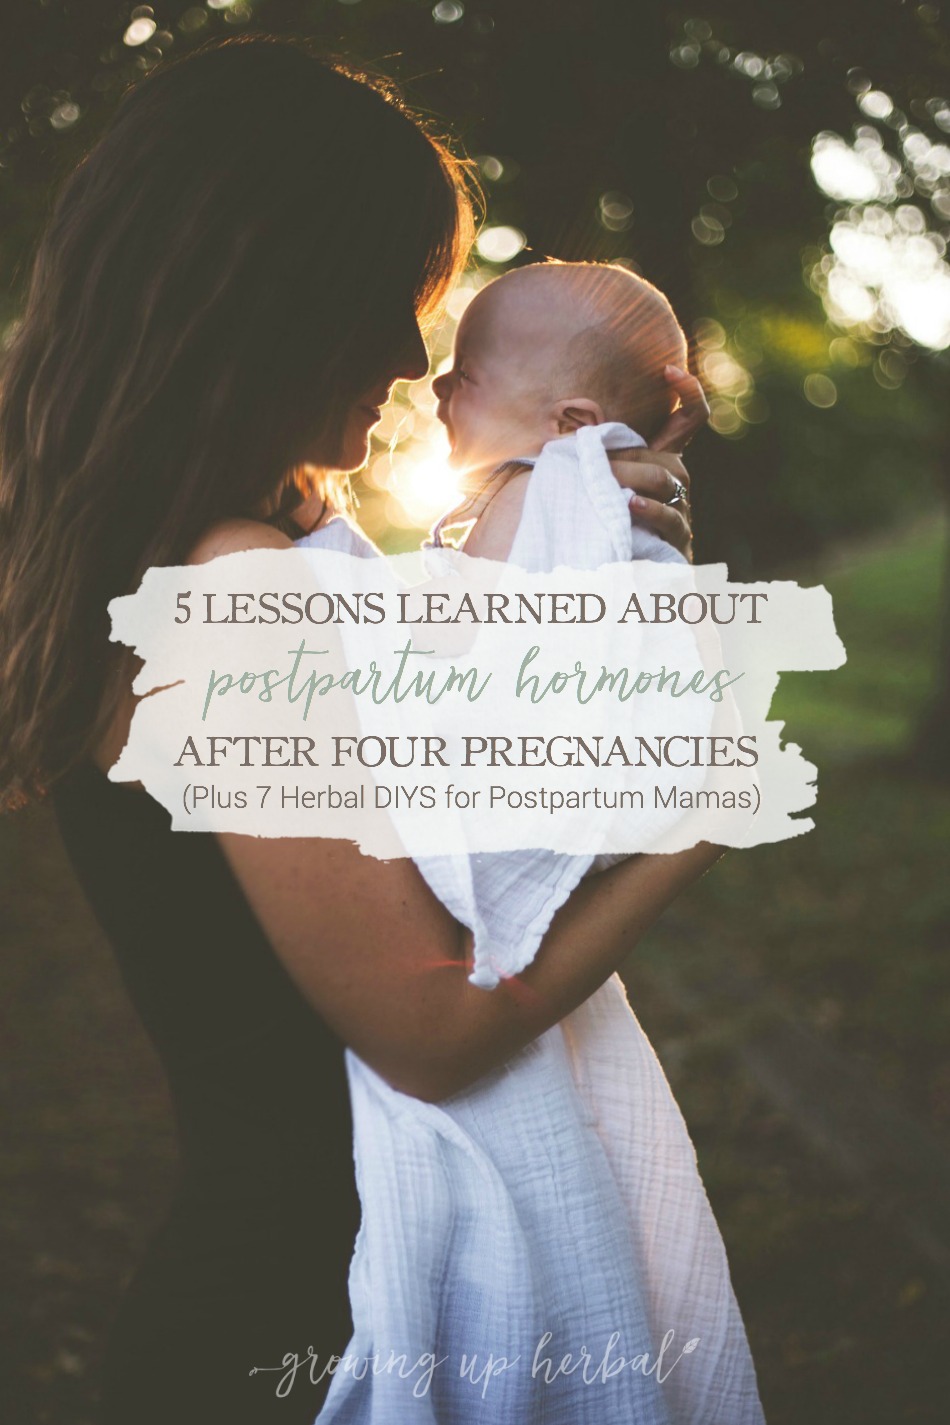 5 Lessons Learned About Postpartum Hormones After Four Pregnancies (Plus 7 Herbal DIYs for Postpartum Mamas) | Growing Up Herbal | Postpartum hormones got you feeling like you don’t know who you are? Here are natural hormonal helps for the postpartum mom.